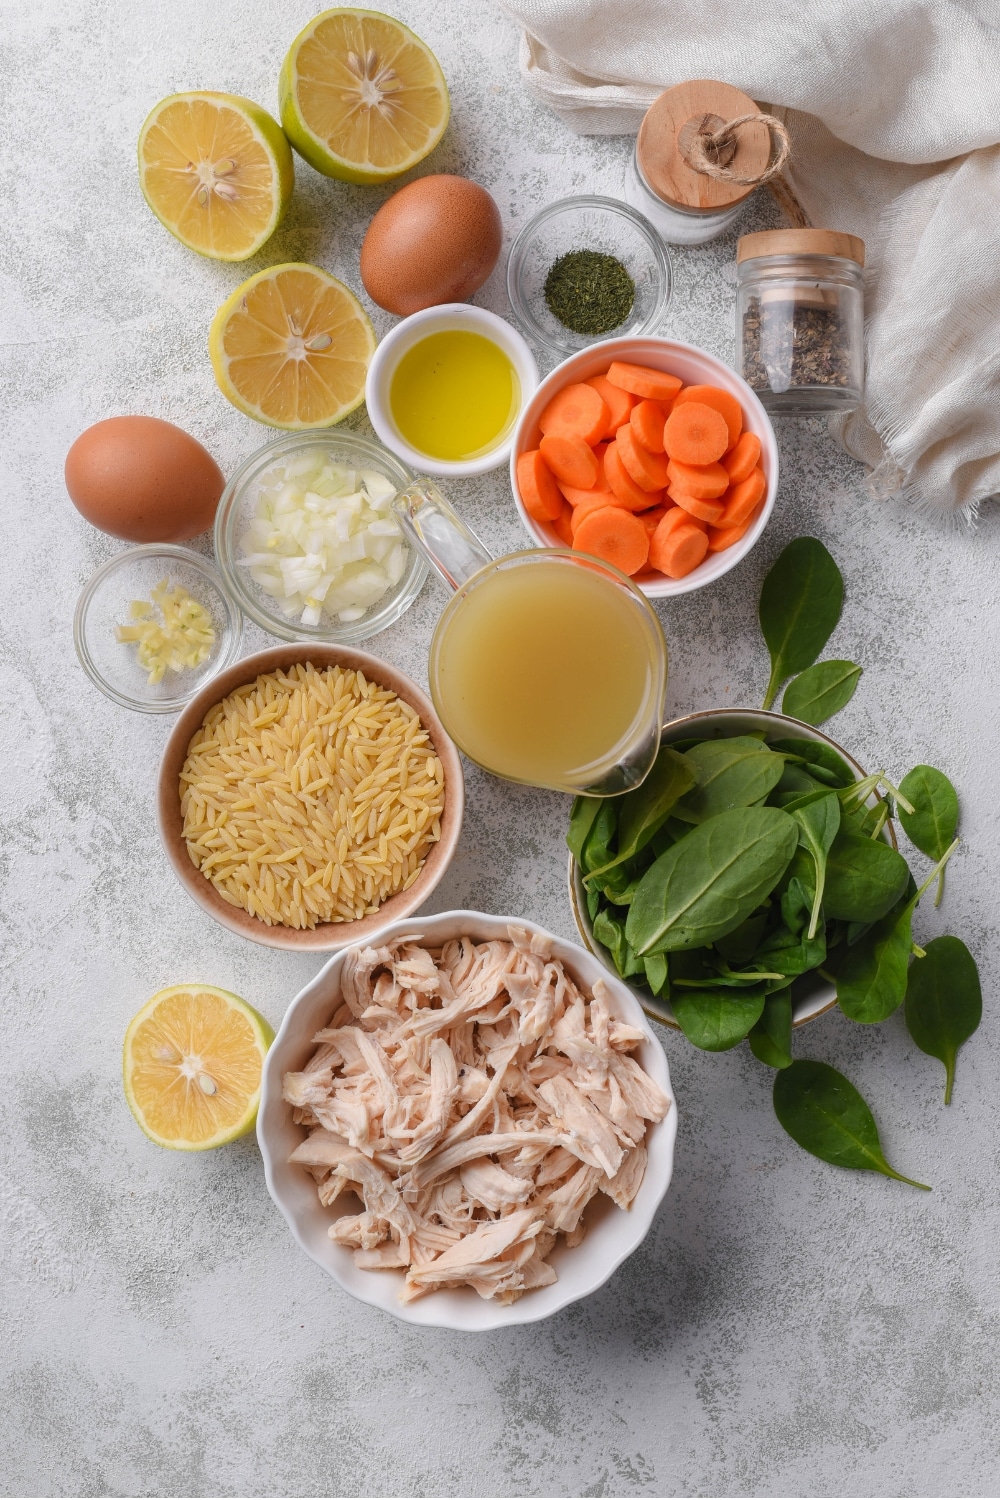 Several bowls of varying soup ingredients including shredded chicken, spinach, orzo pasta, broth, carrots, garlic, onion, and herbs.